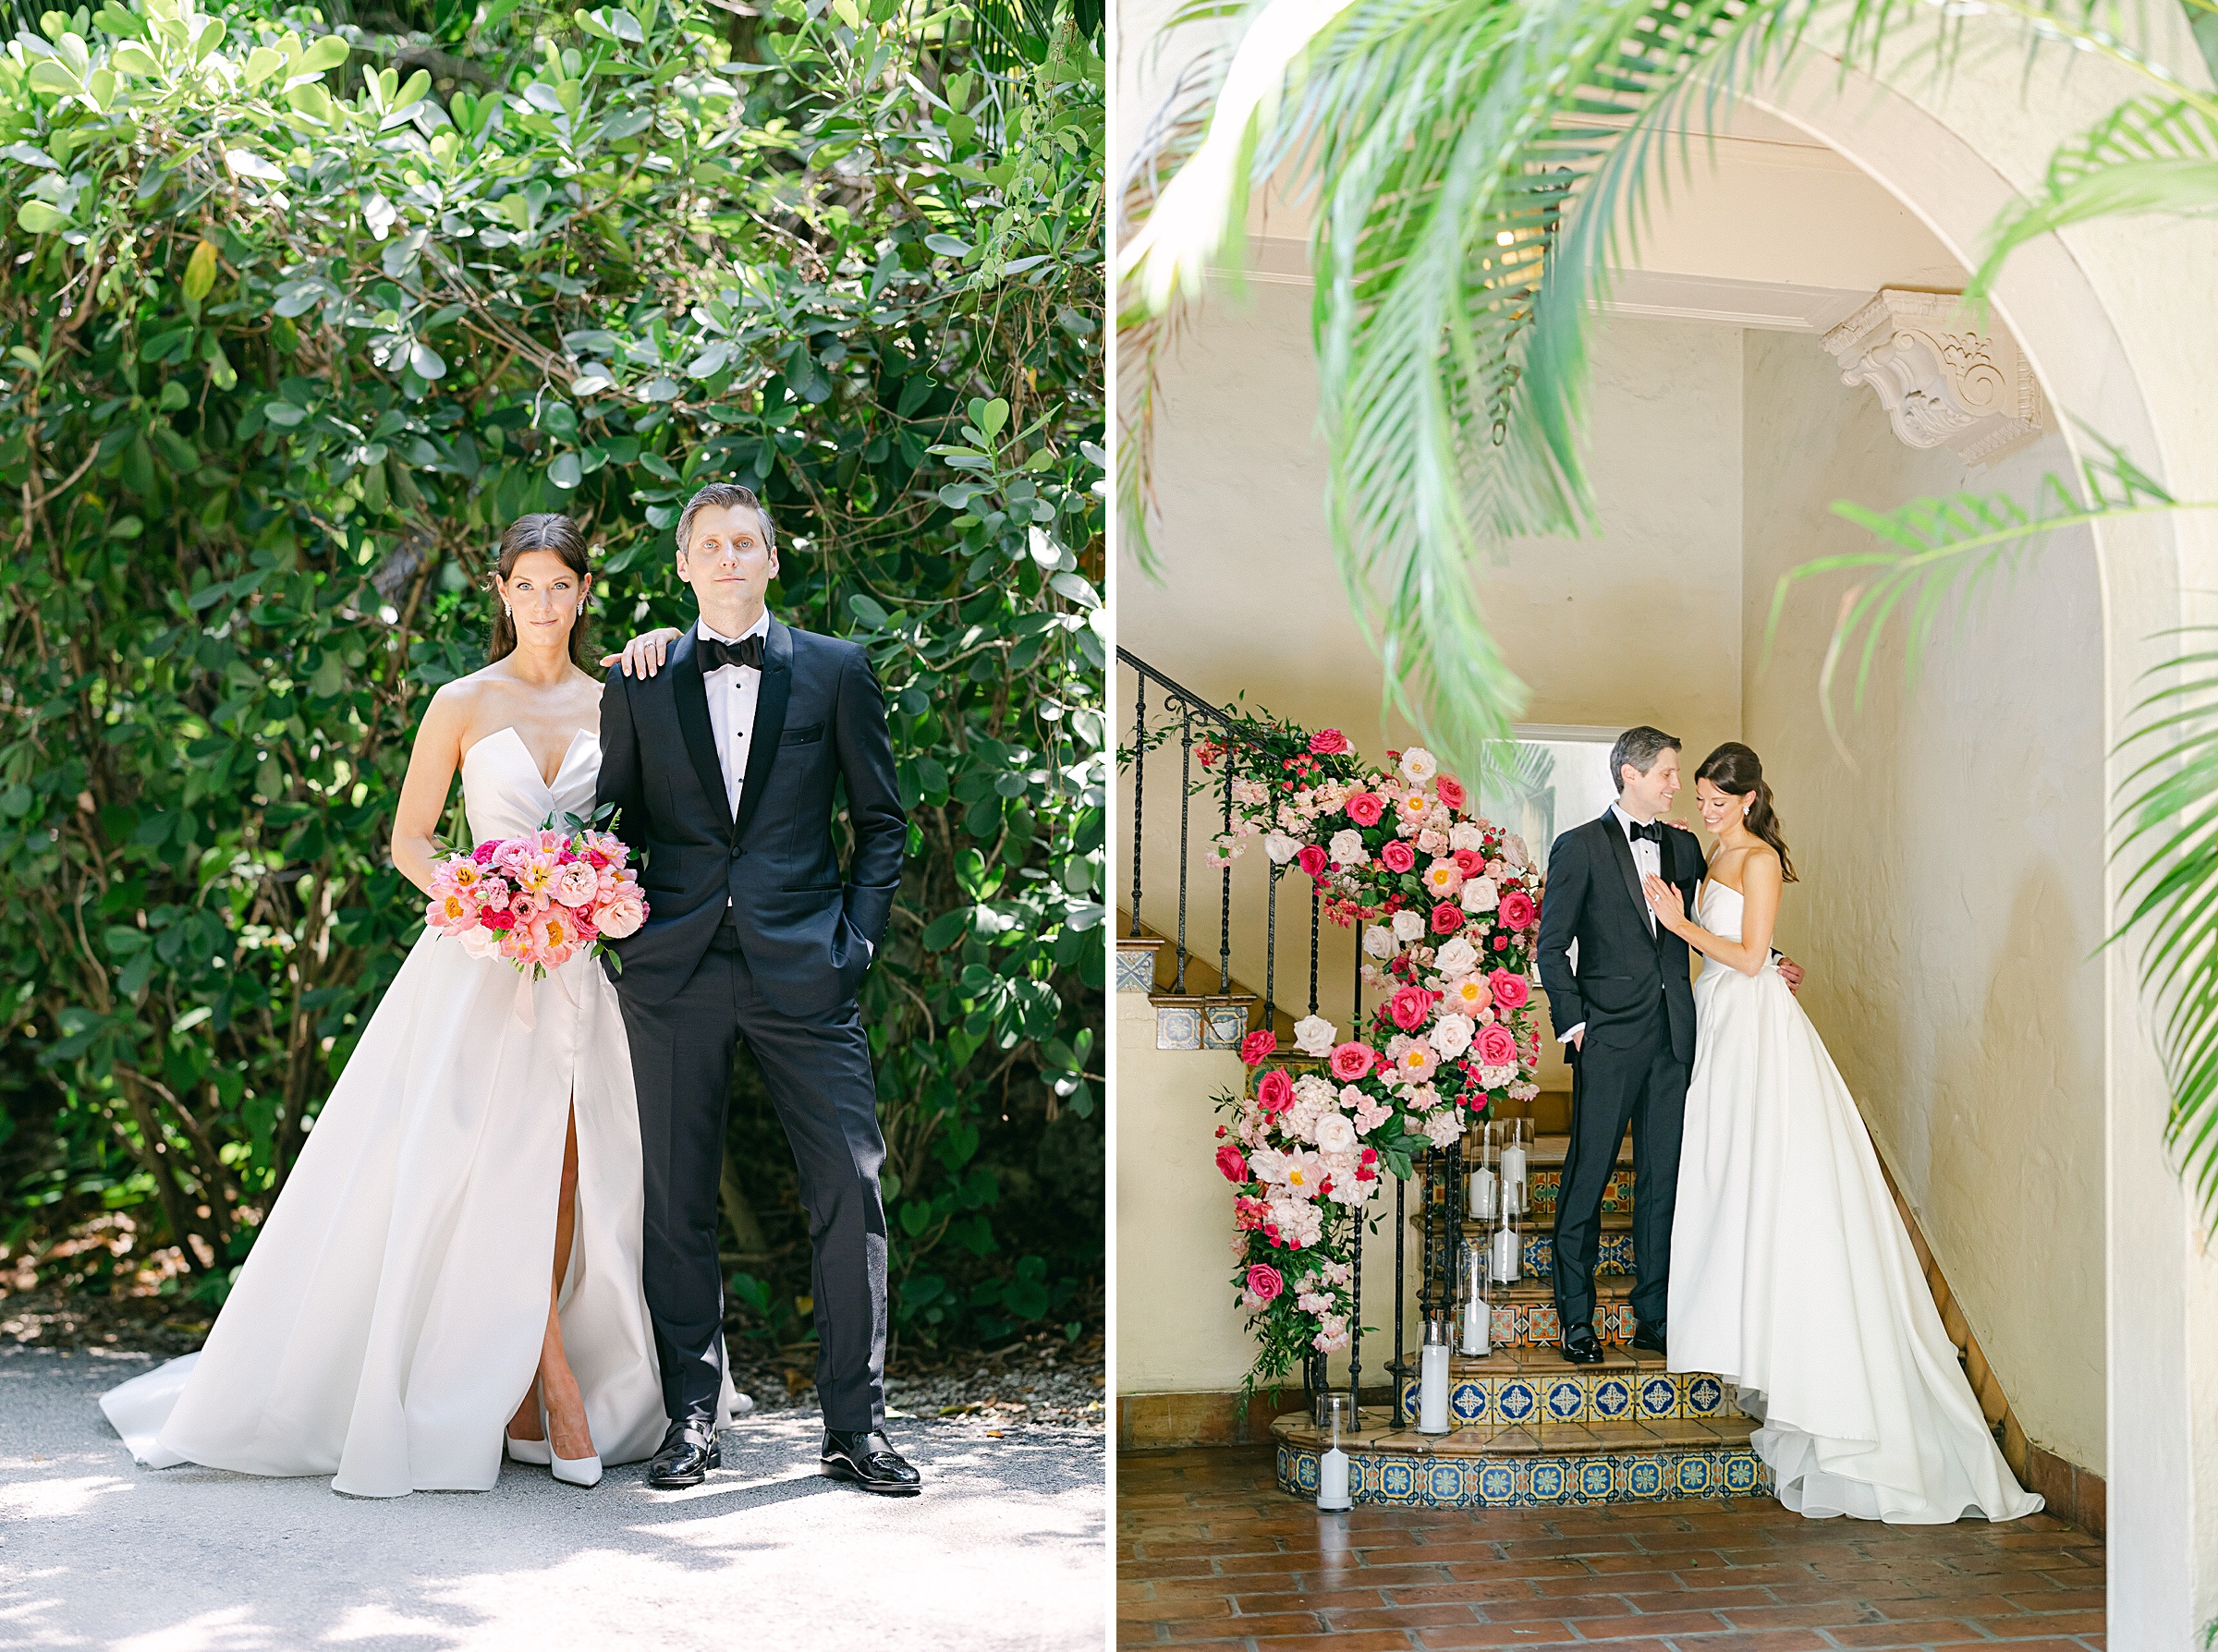 Newlywed portraits at Villa Woodbine with barbie pink, blush florals at Villa Woodbine staircase